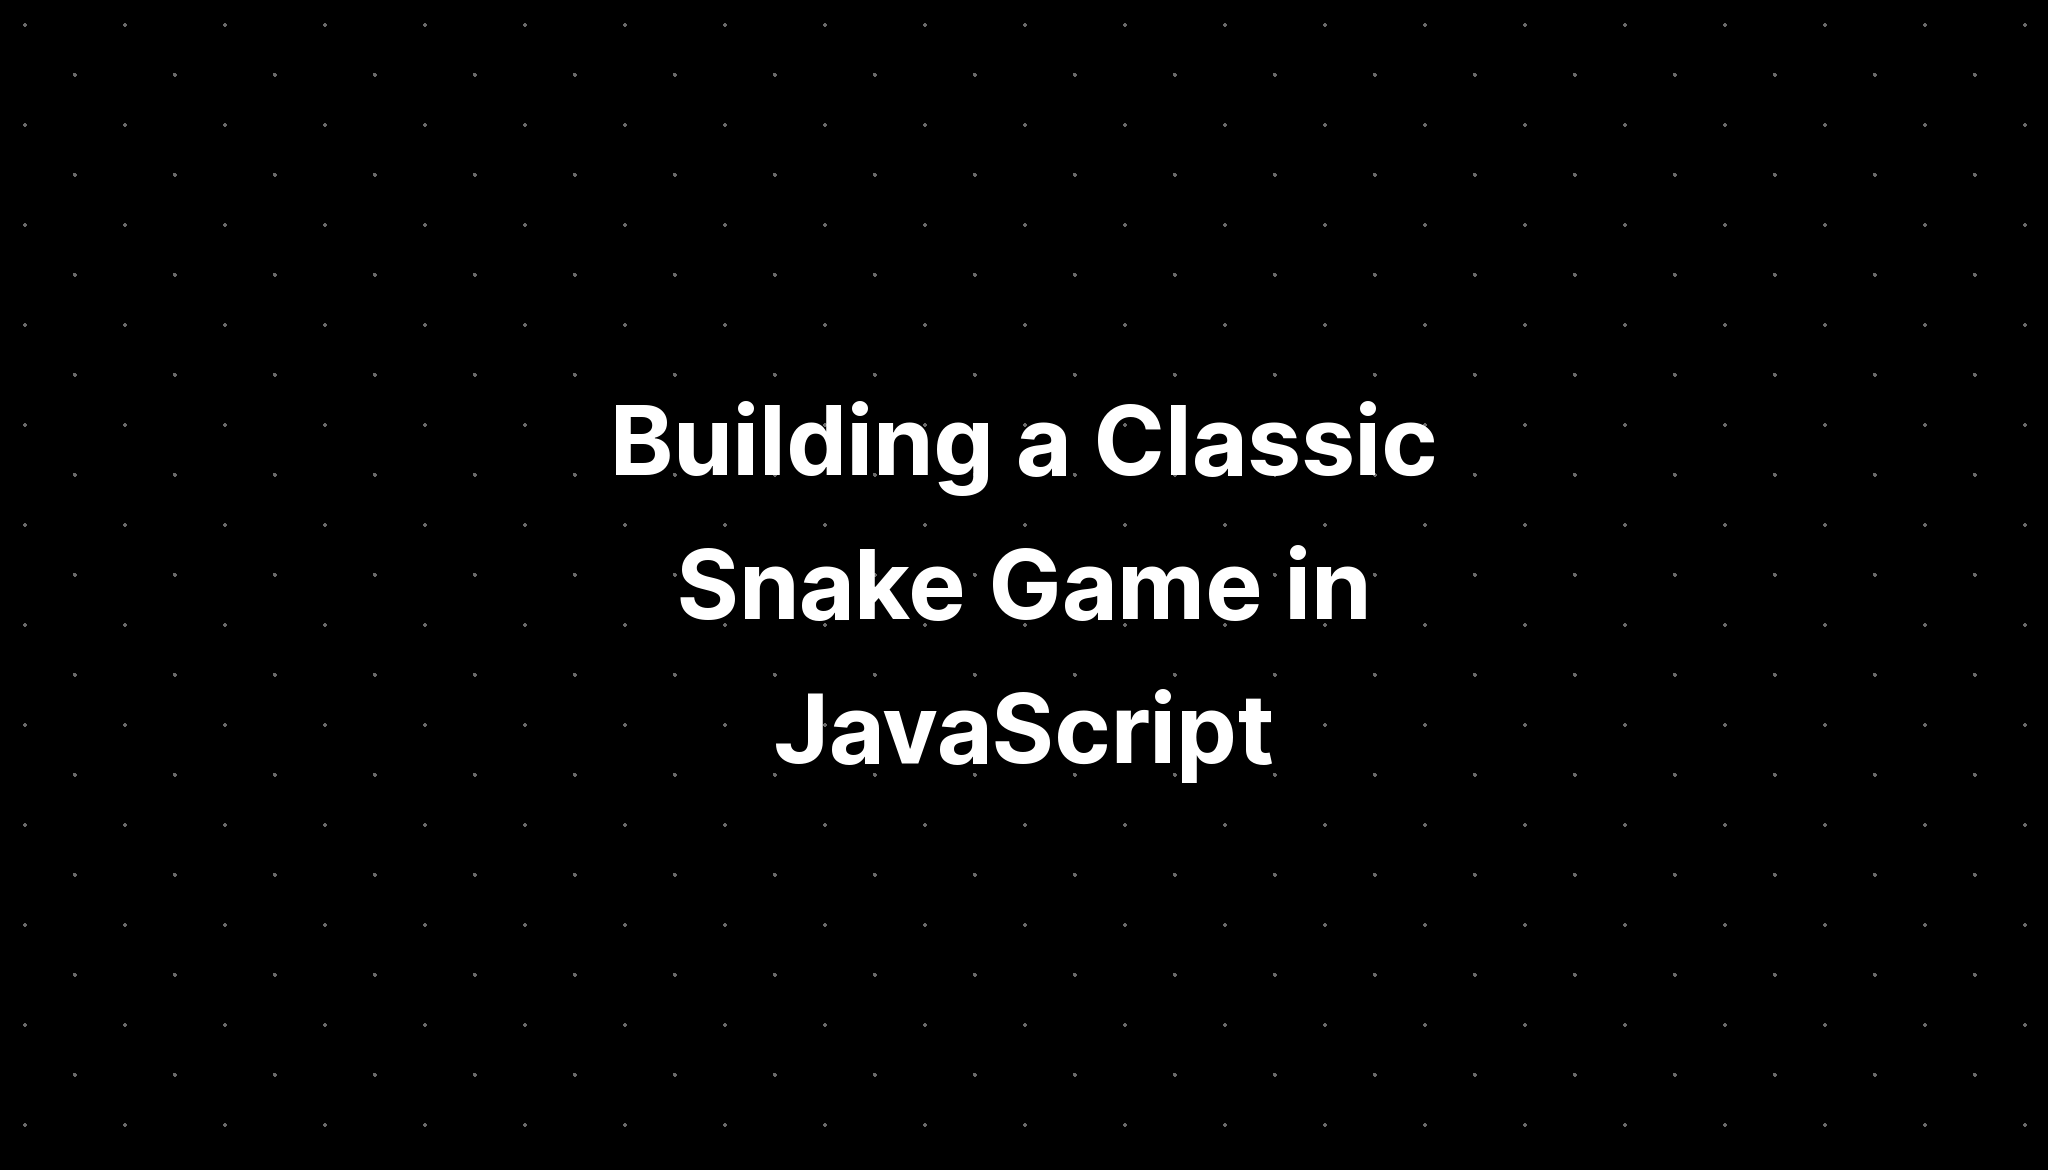 The classic snake game - A Humble Opinion